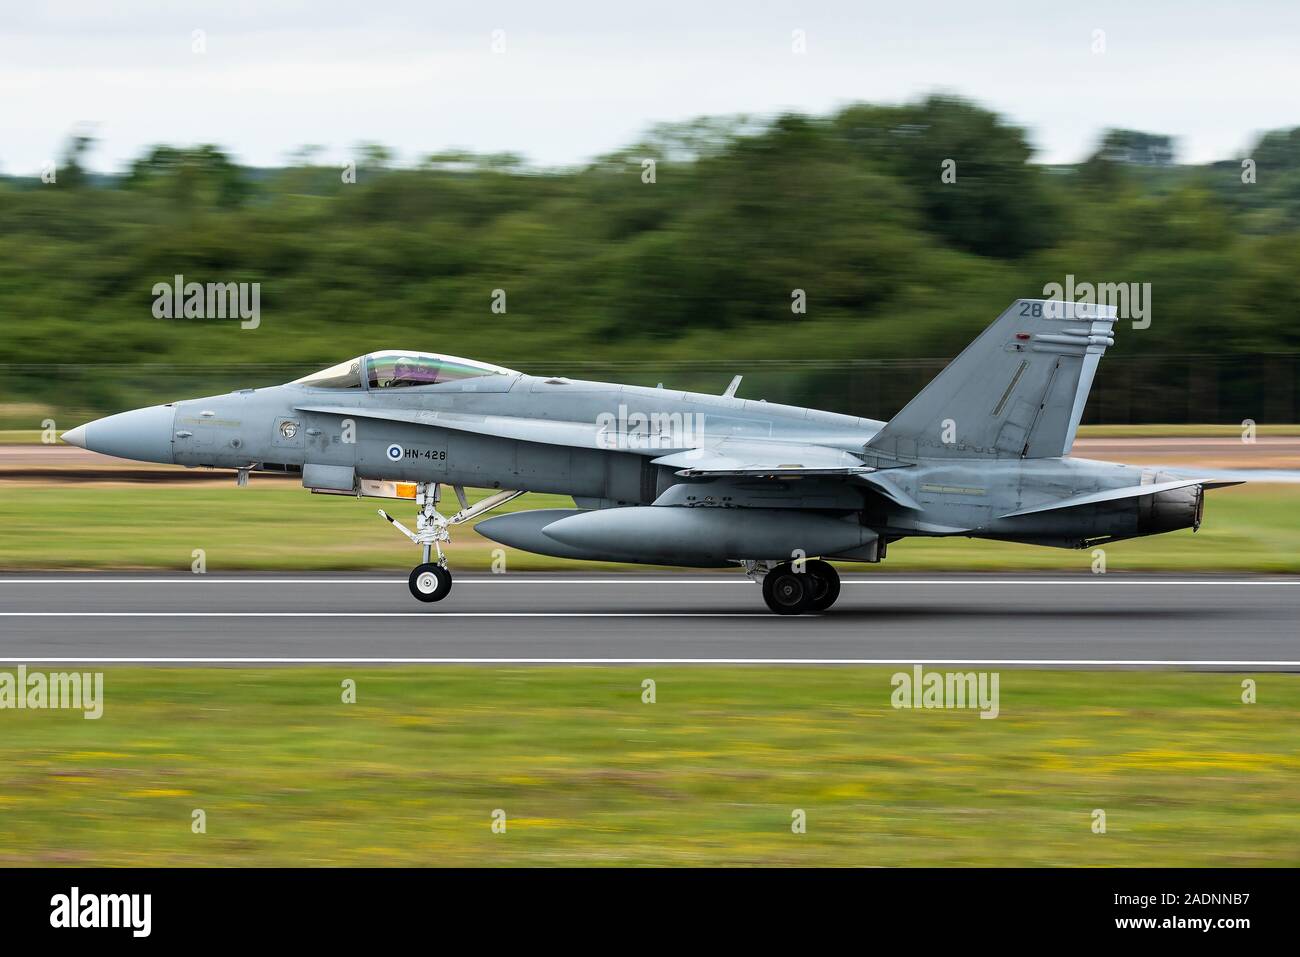 A McDonnell Douglas F/A-18 Hornet twin-engine fighter jet of the Finnish Air Force. Stock Photo